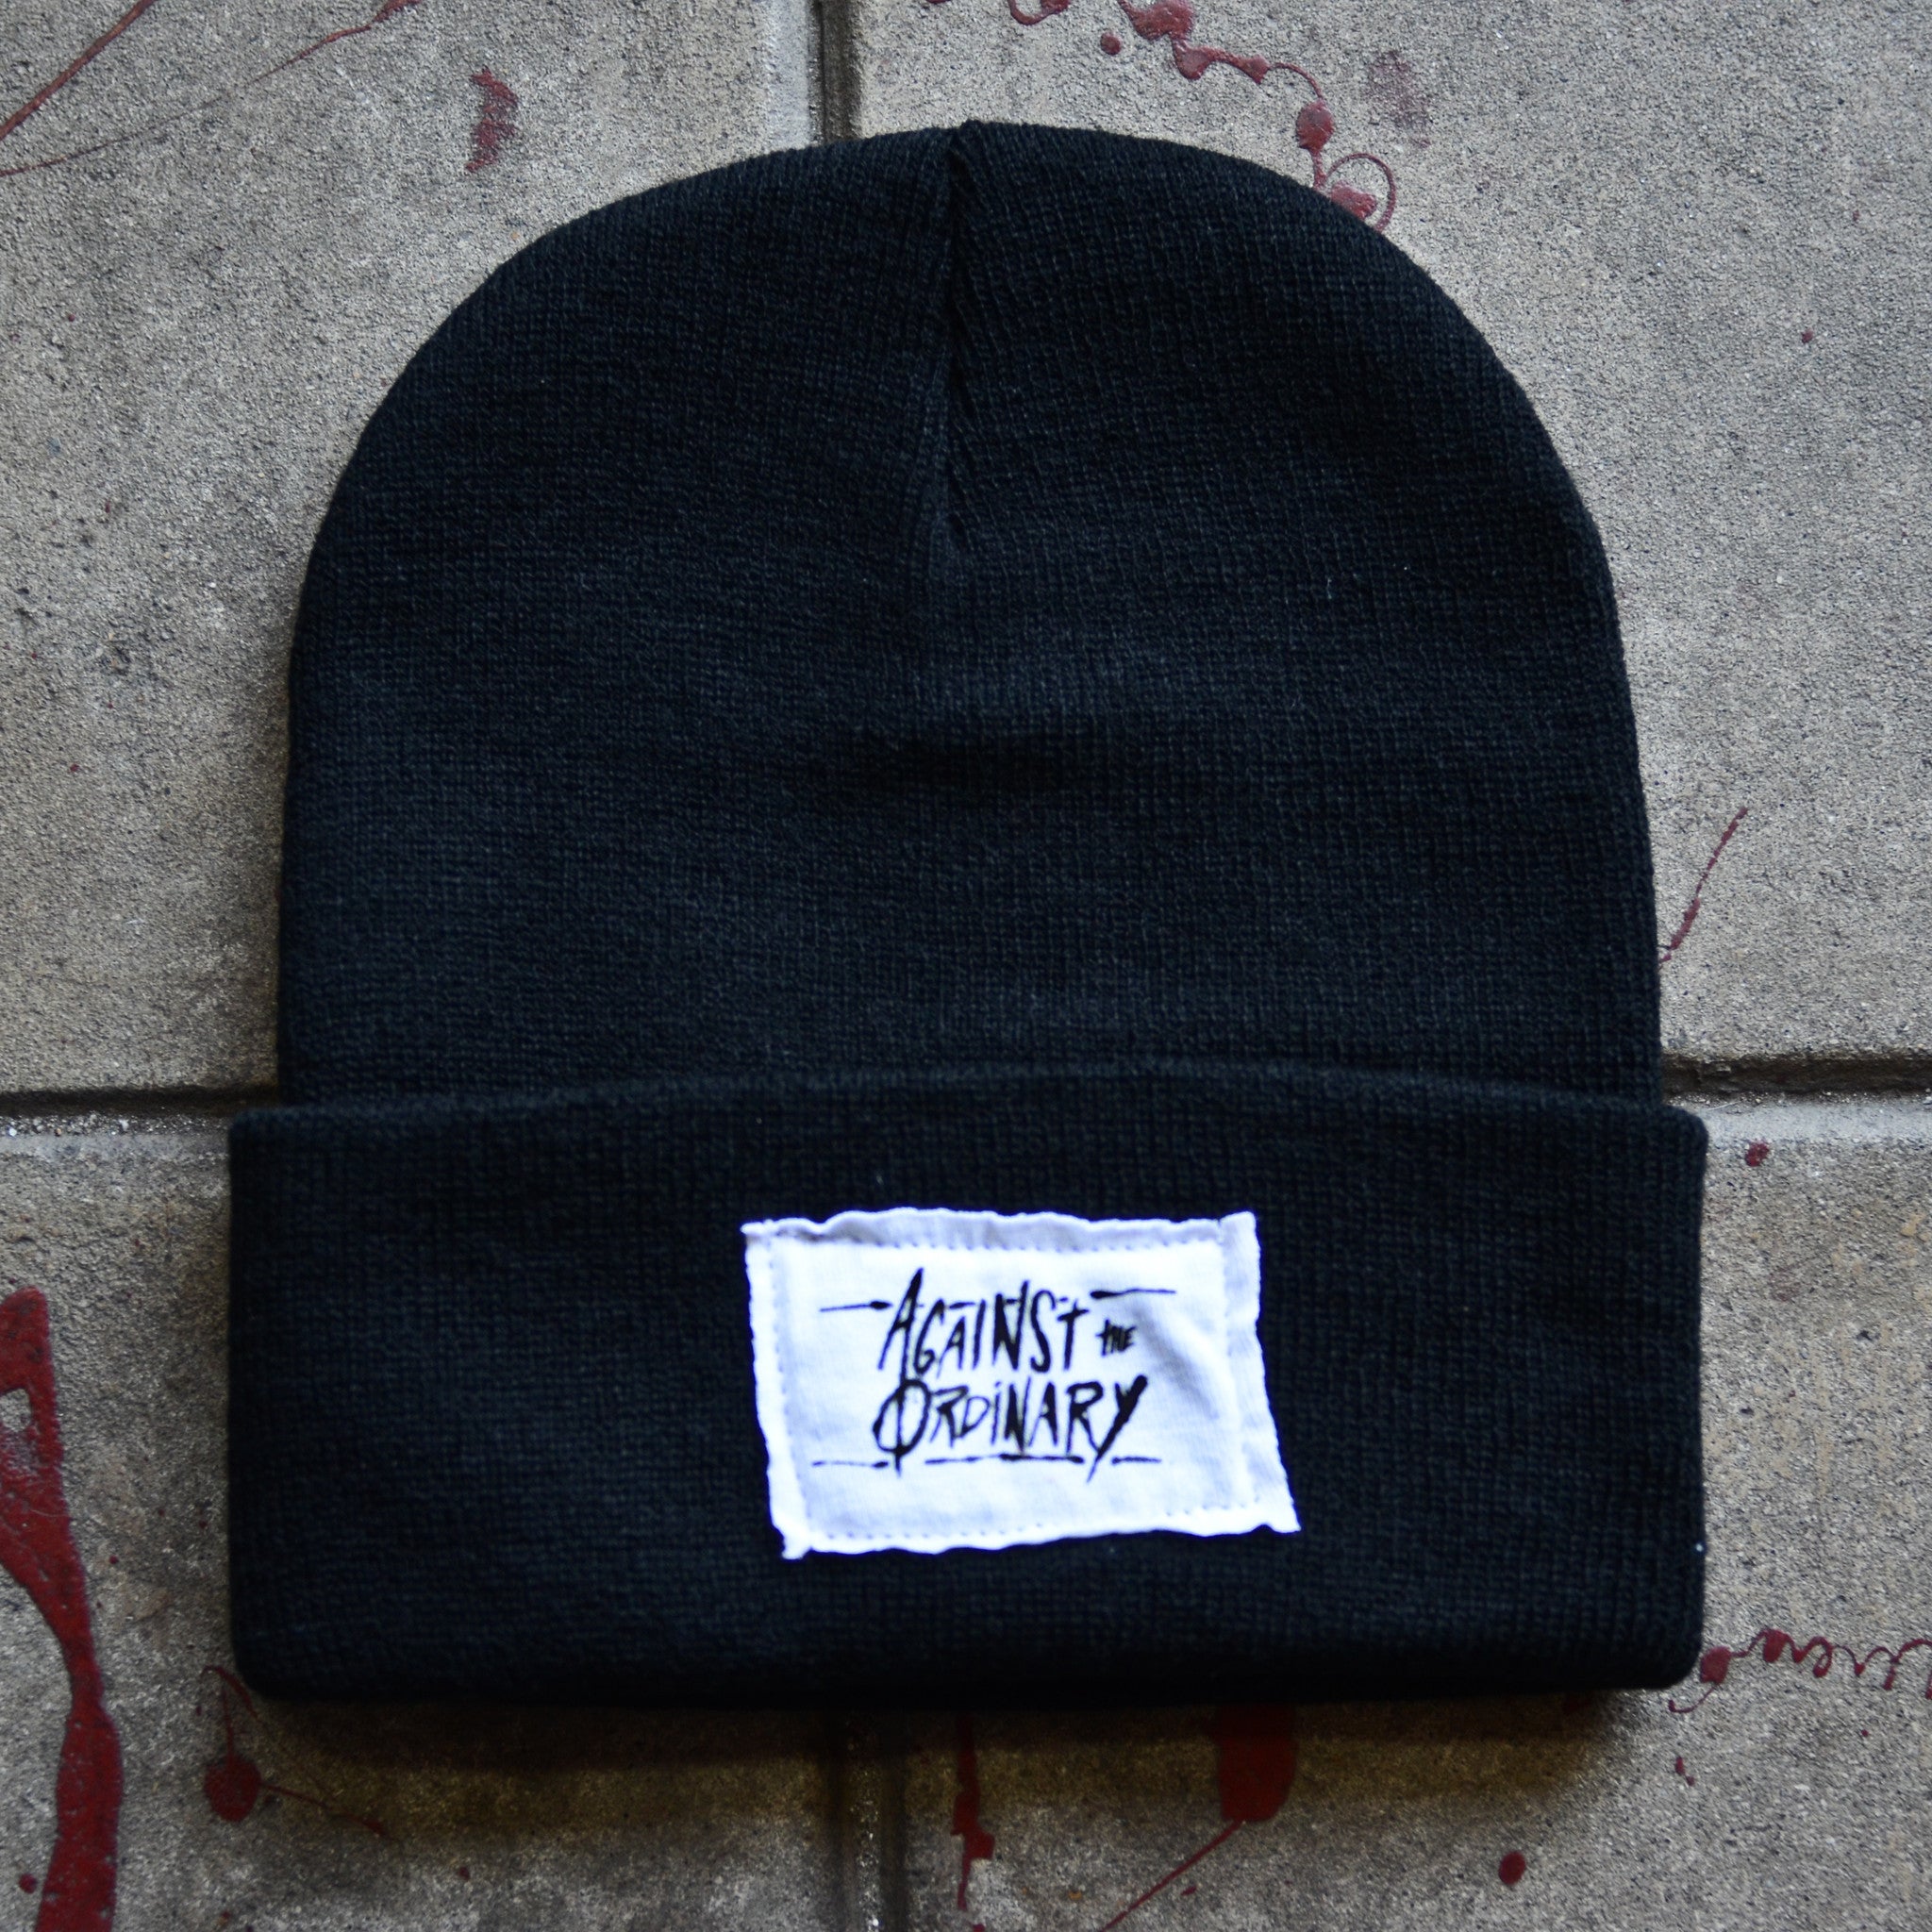 Against the Ordinary Black Beanie with White Stitched Label